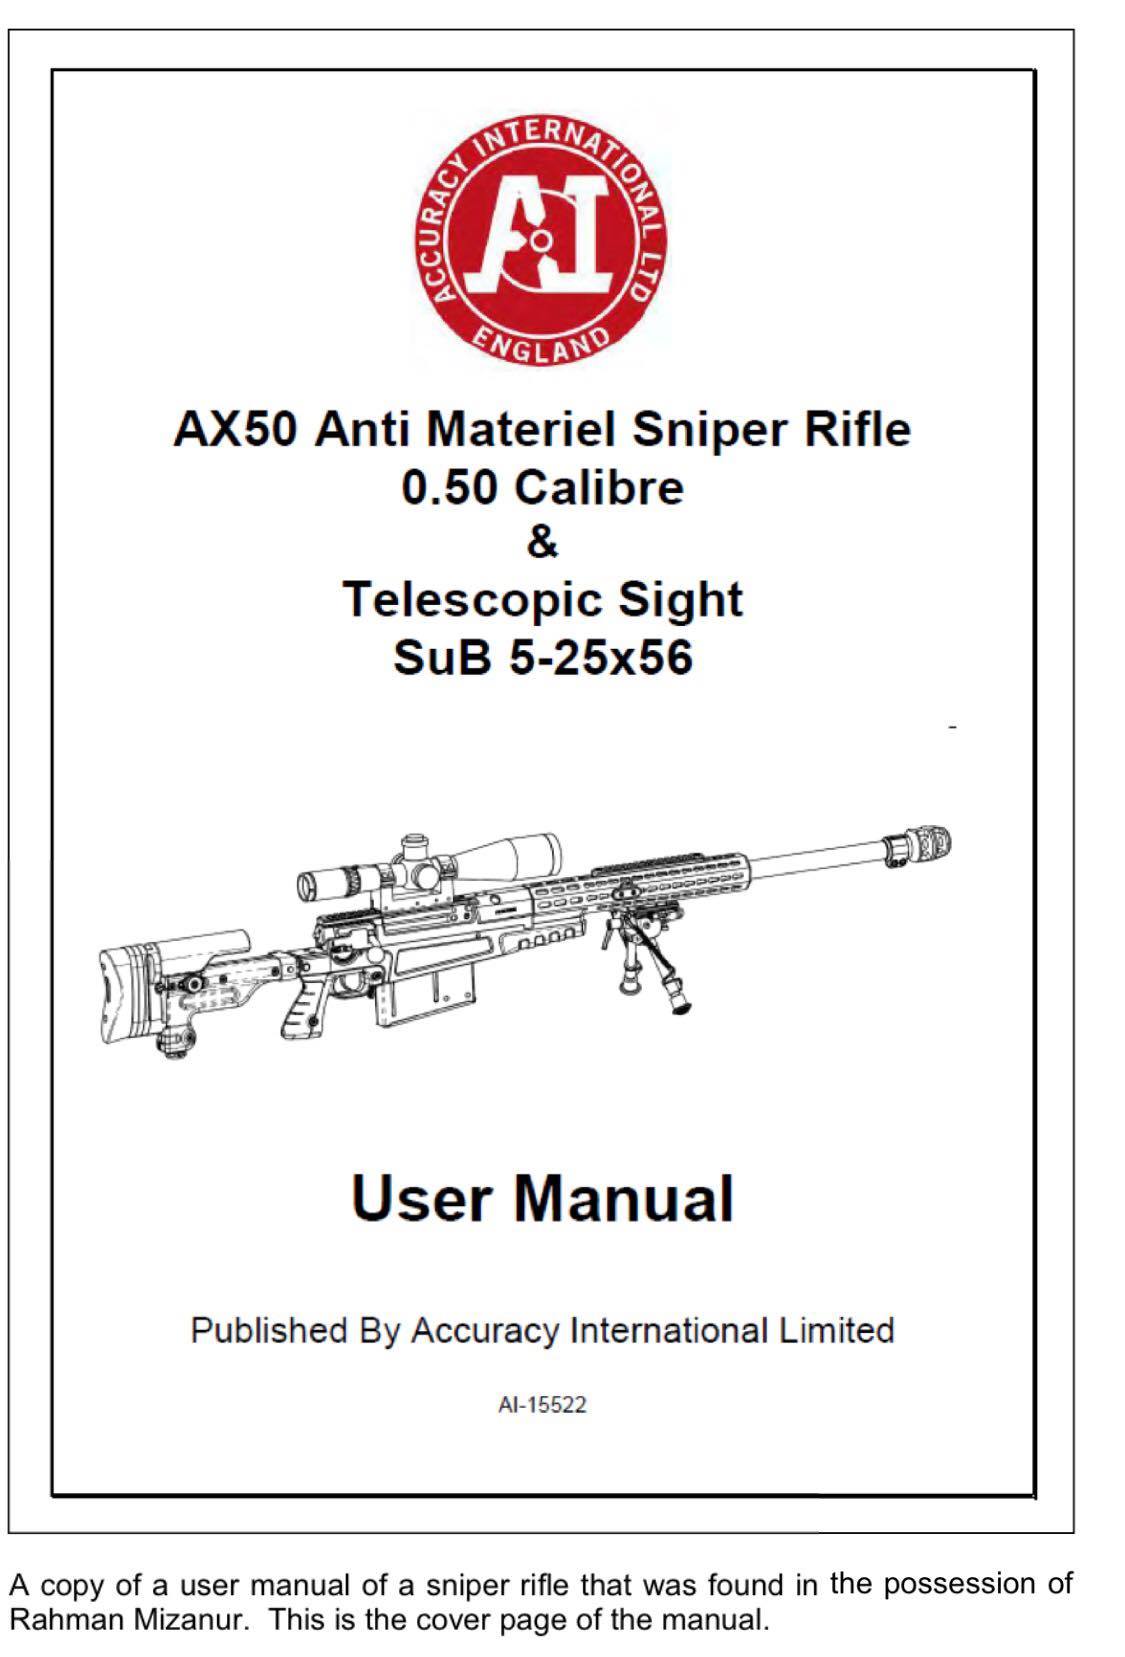 Cover page of a rifle user manual found in the possession of Rahman Mizanur. (Photo courtesy of the MHA)